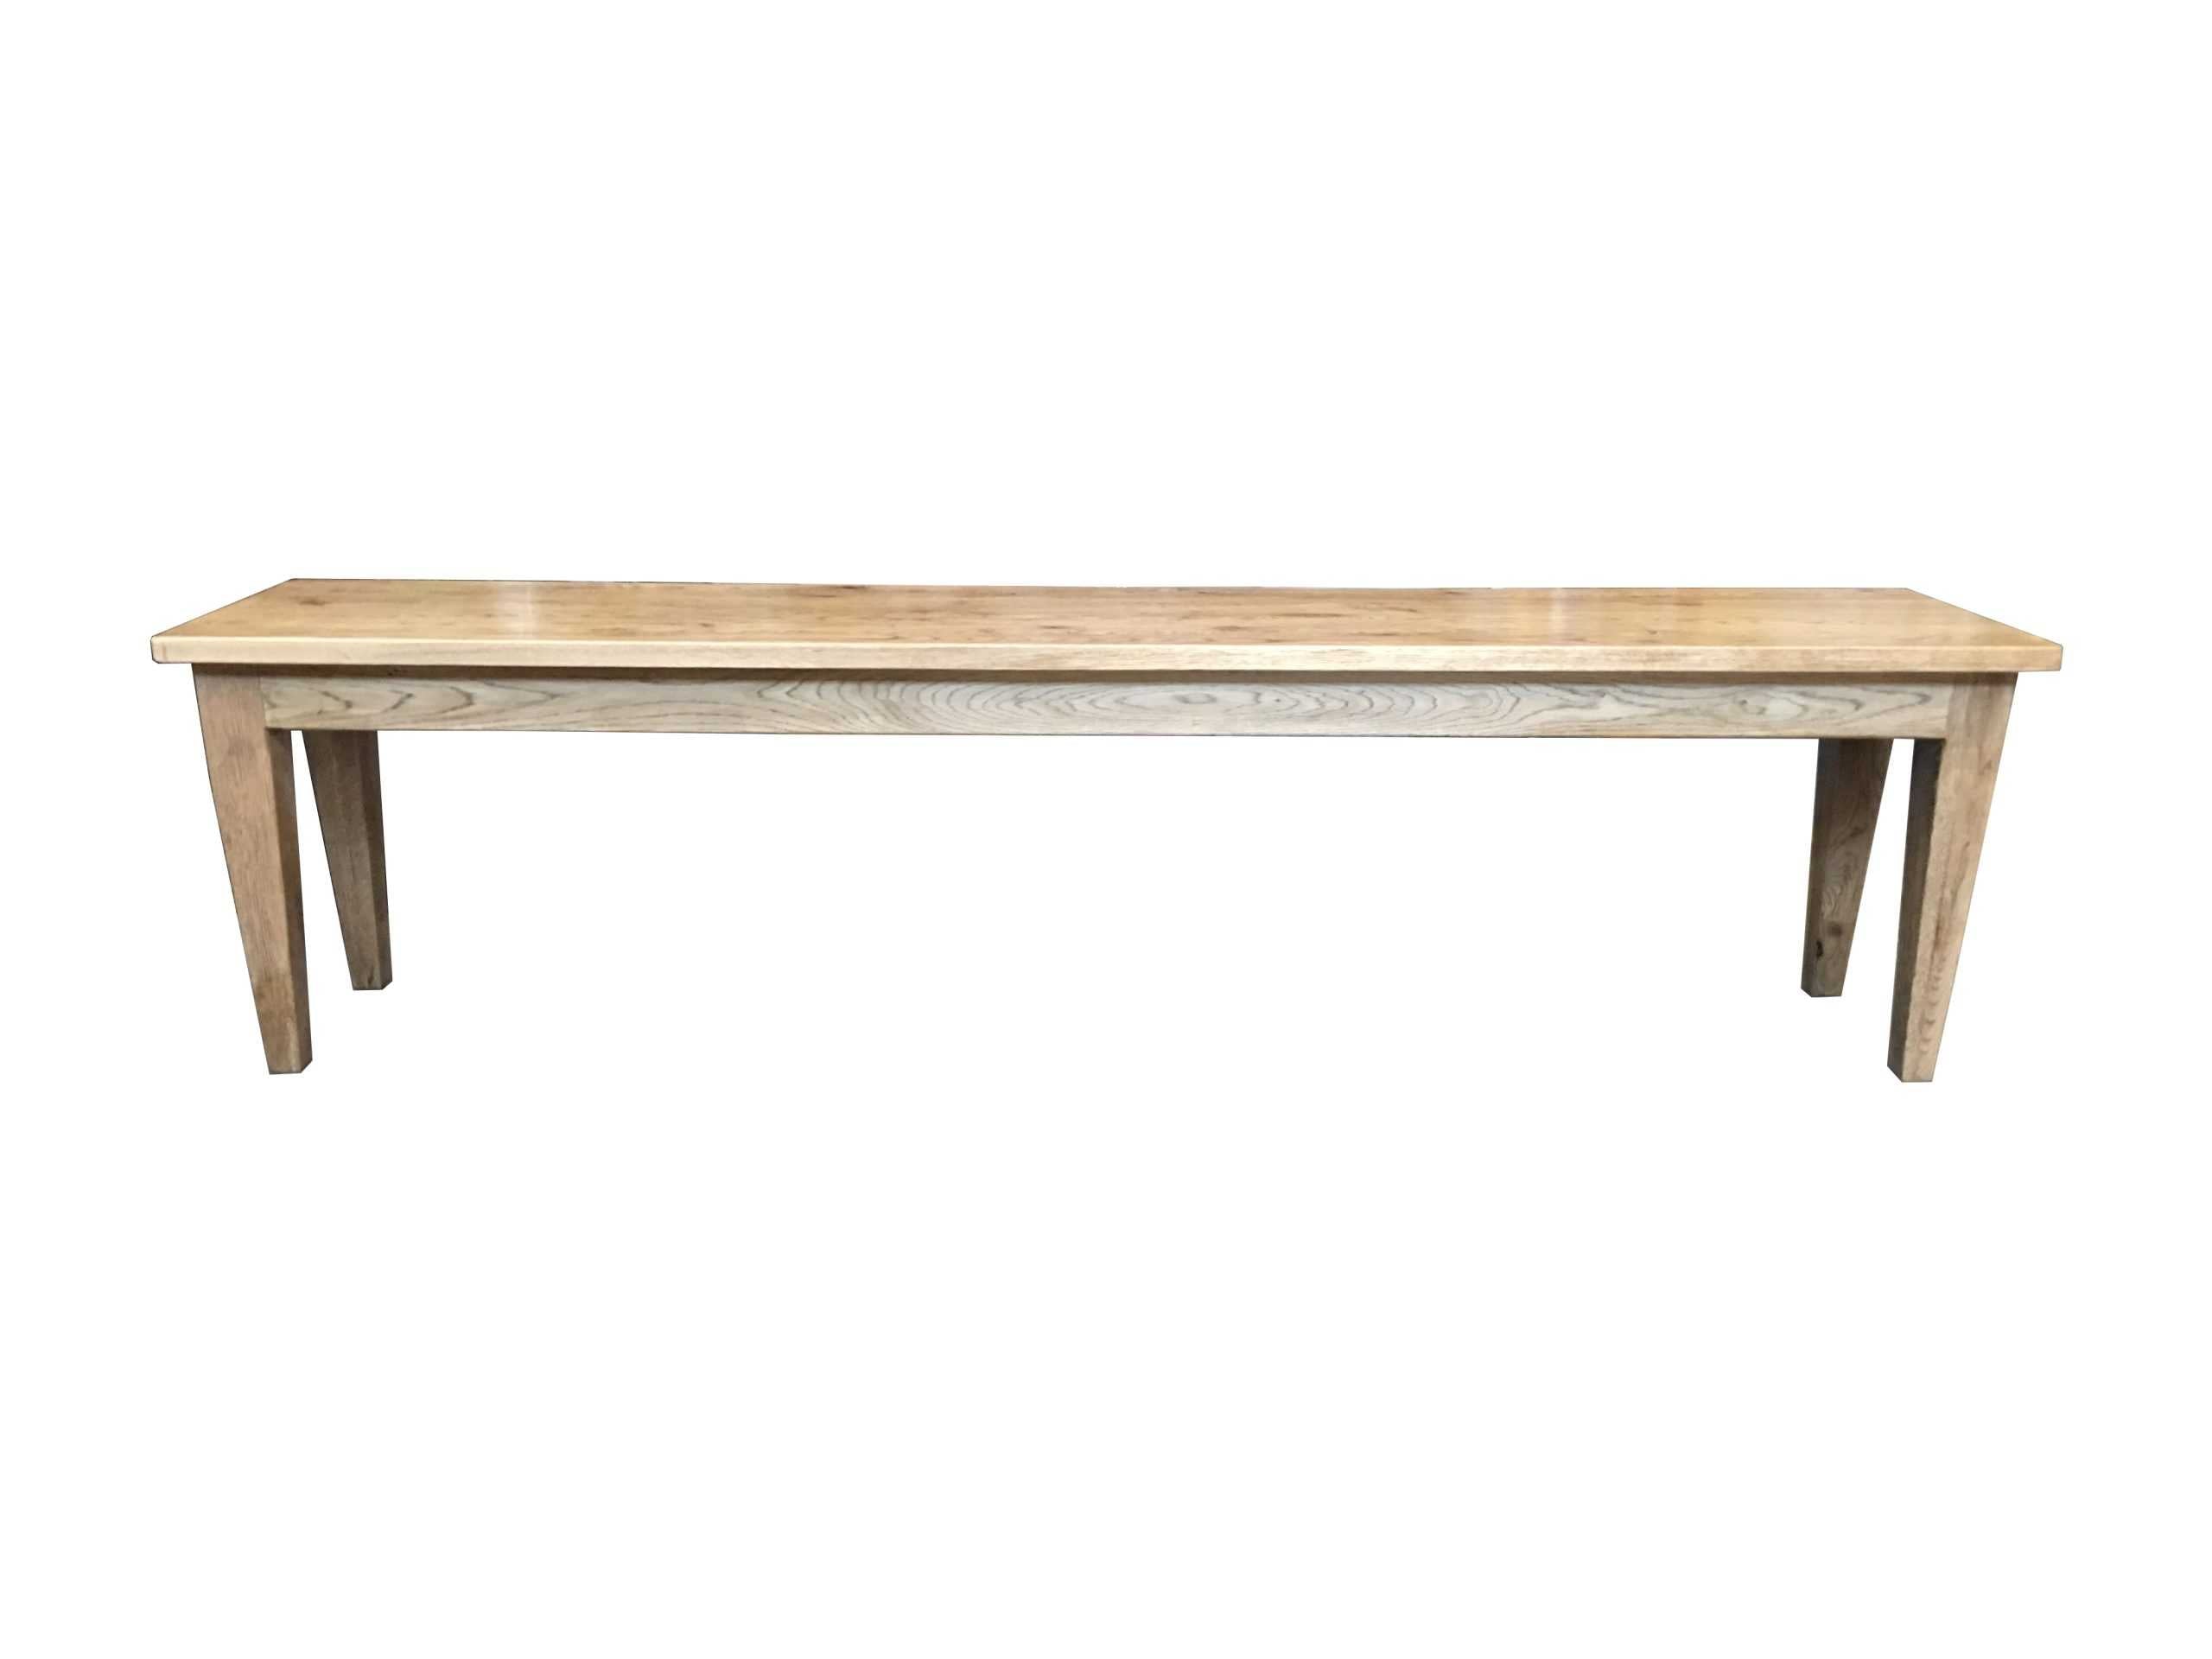 MF Solid Oak Timber Bench without Breadboard